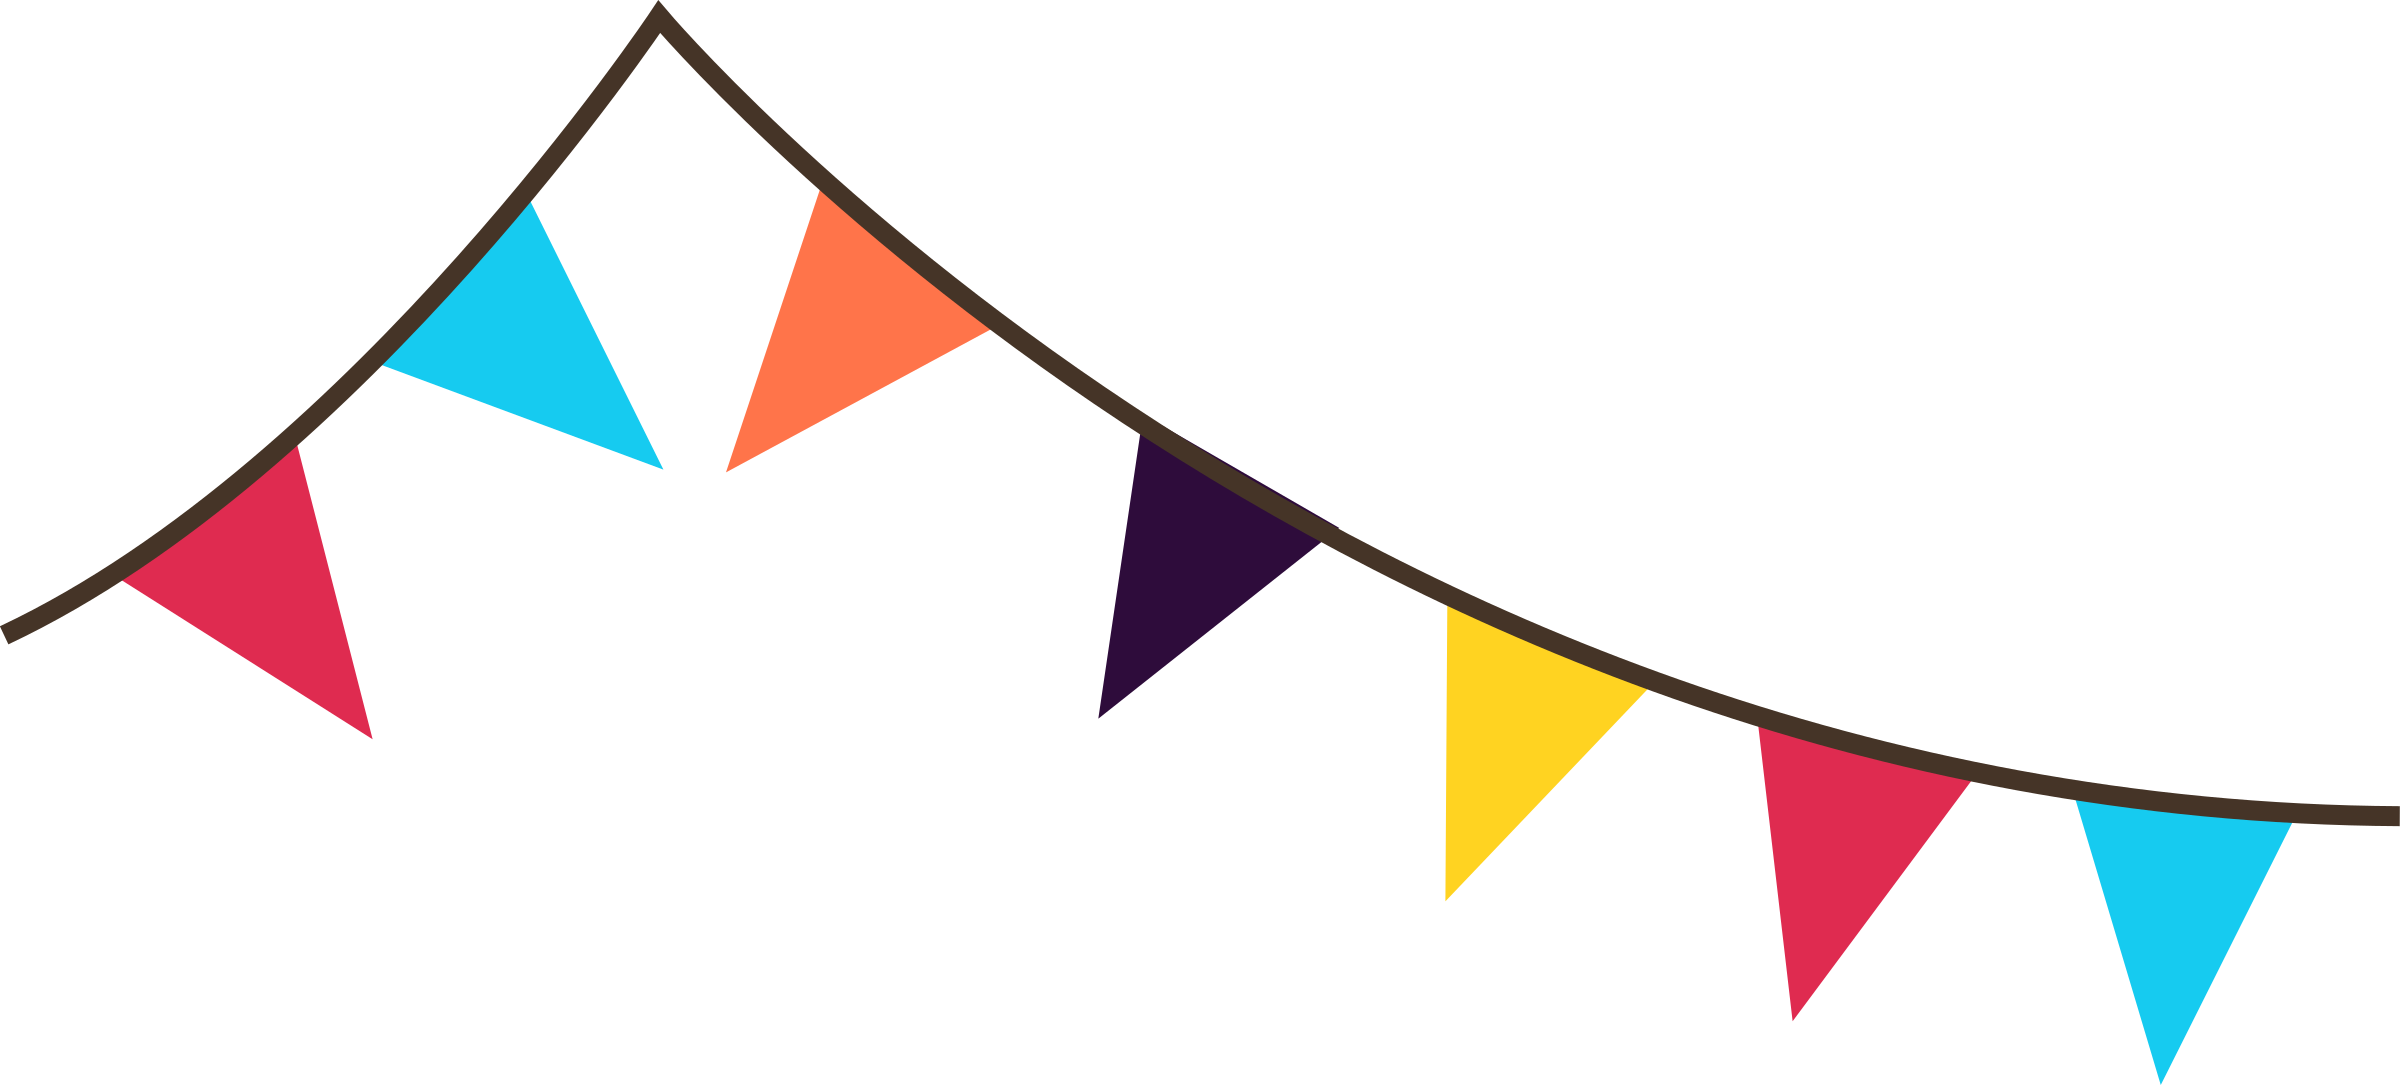 Bunting banner flags 3175